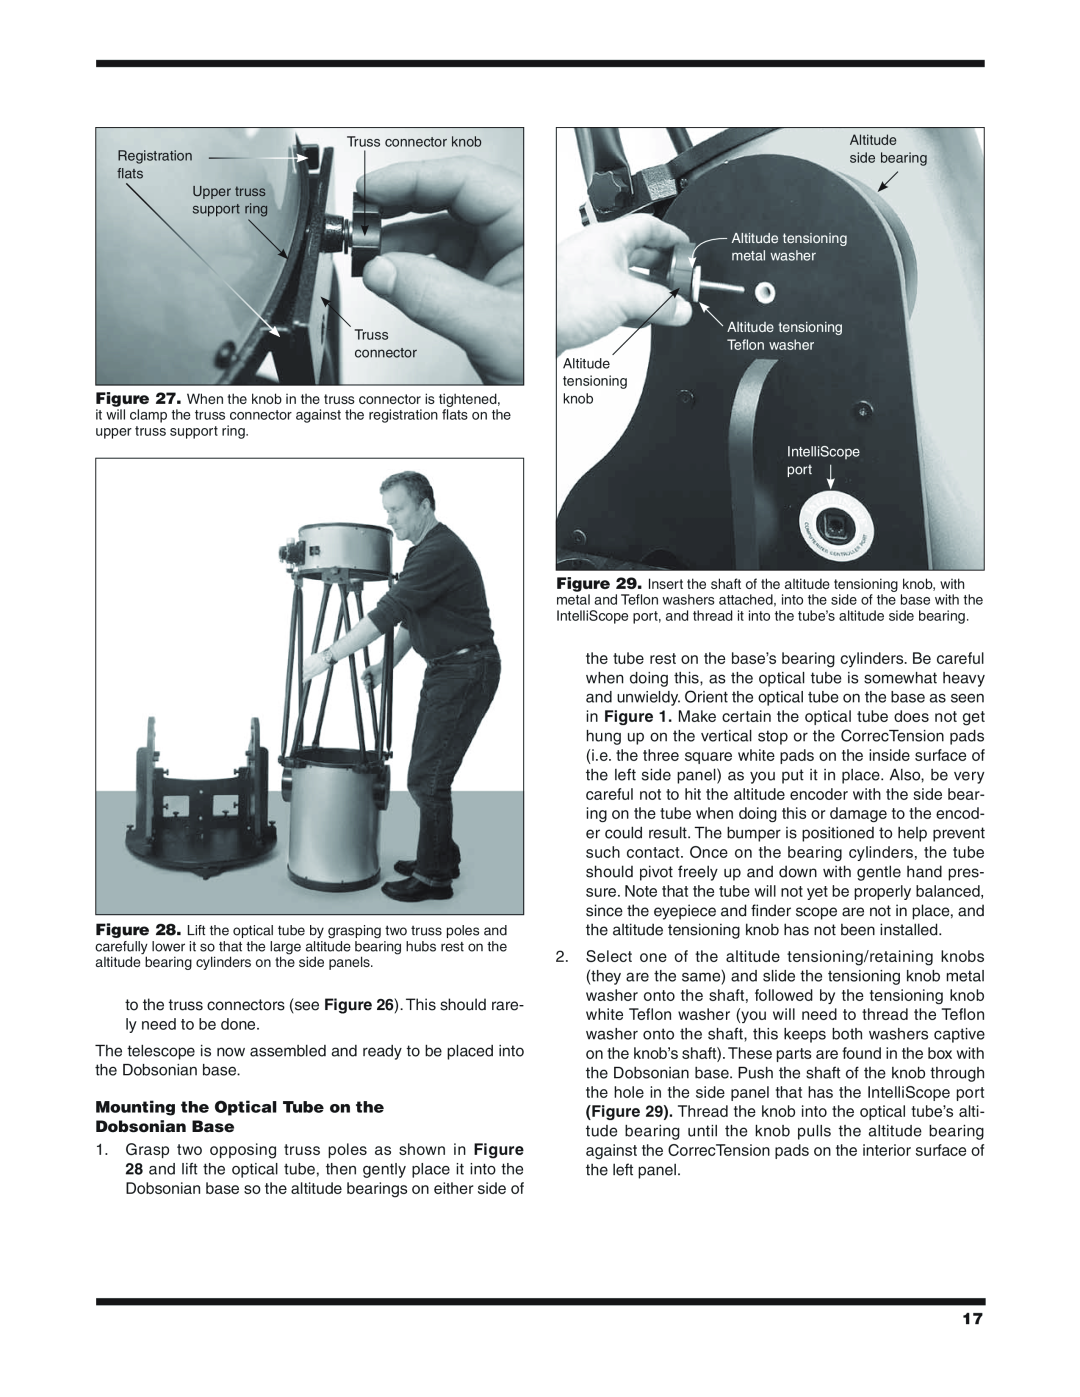 Orion XX14I instruction manual Mounting the Optical Tube on the Dobsonian Base 